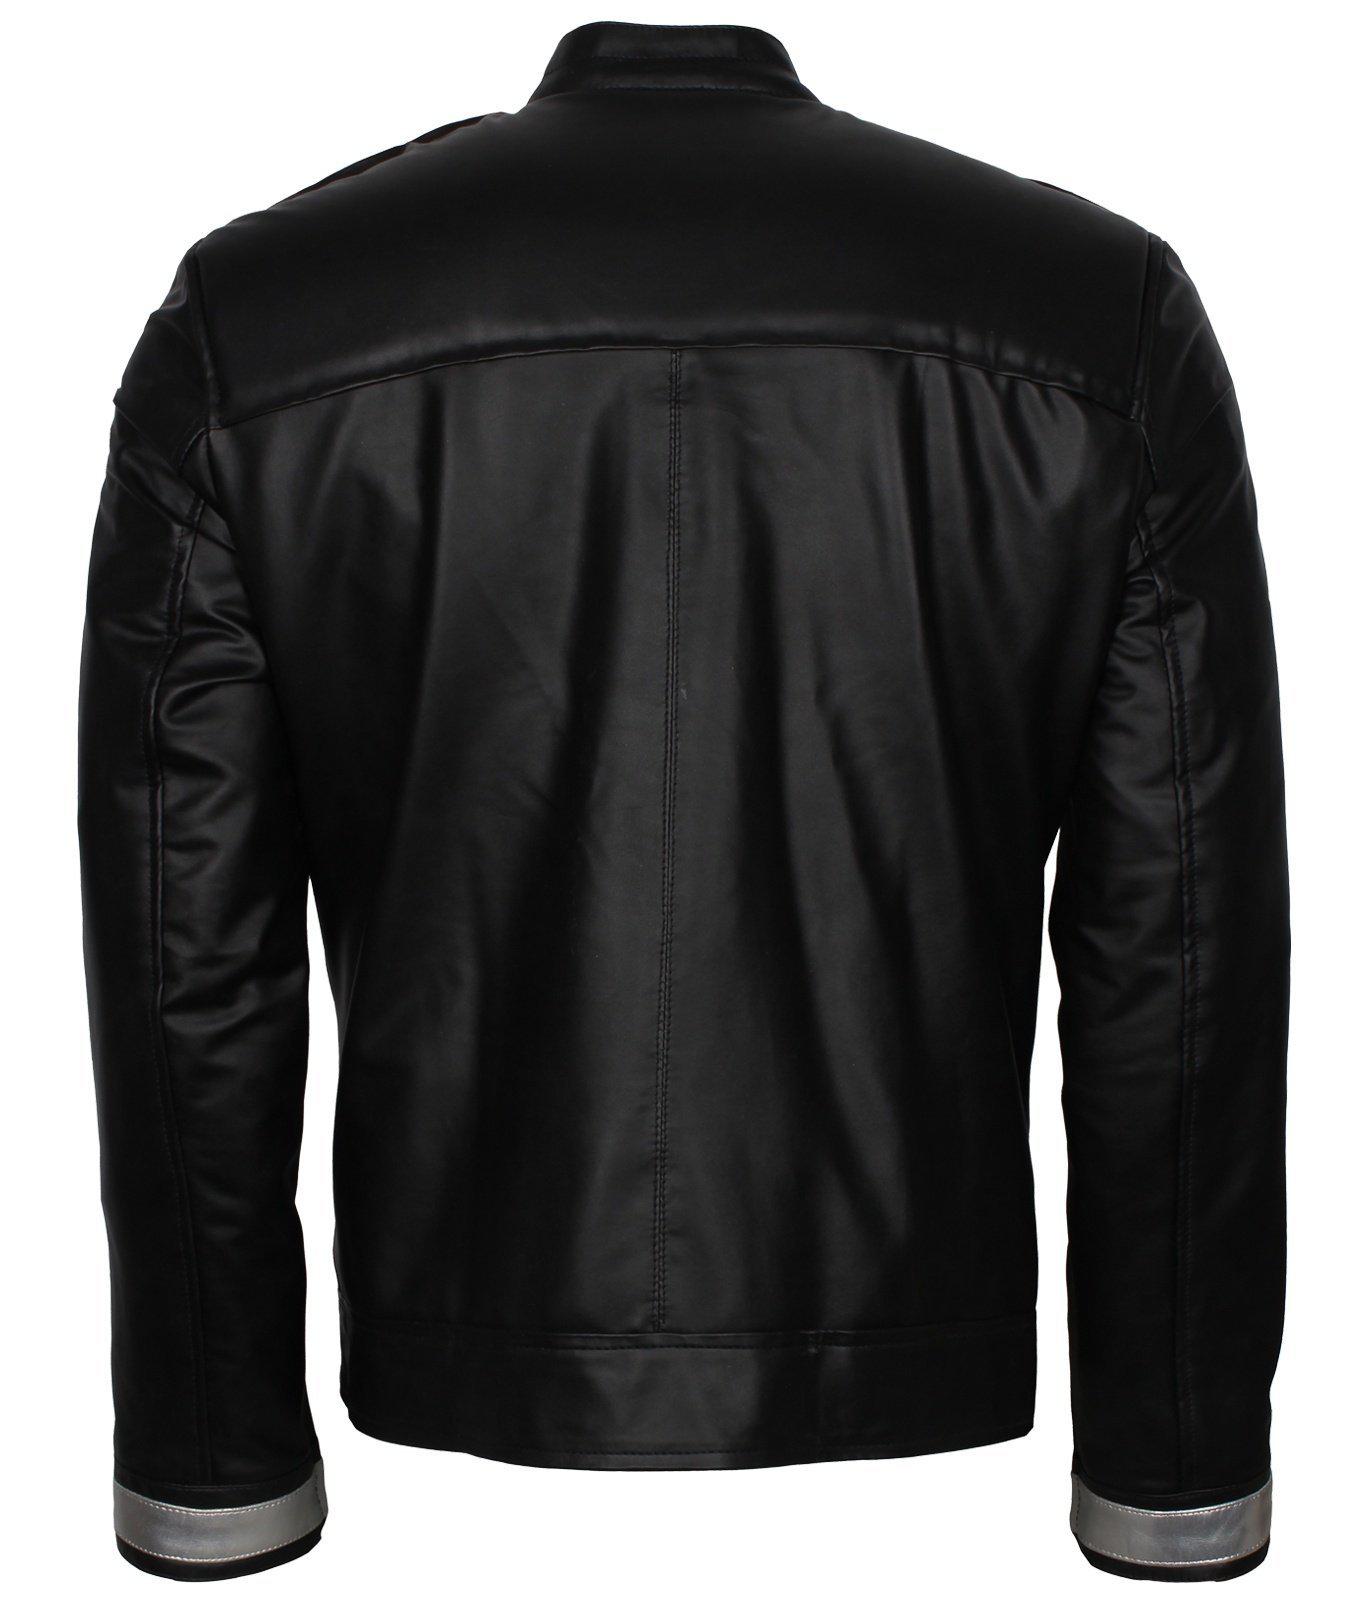 Agents of Shield jacket